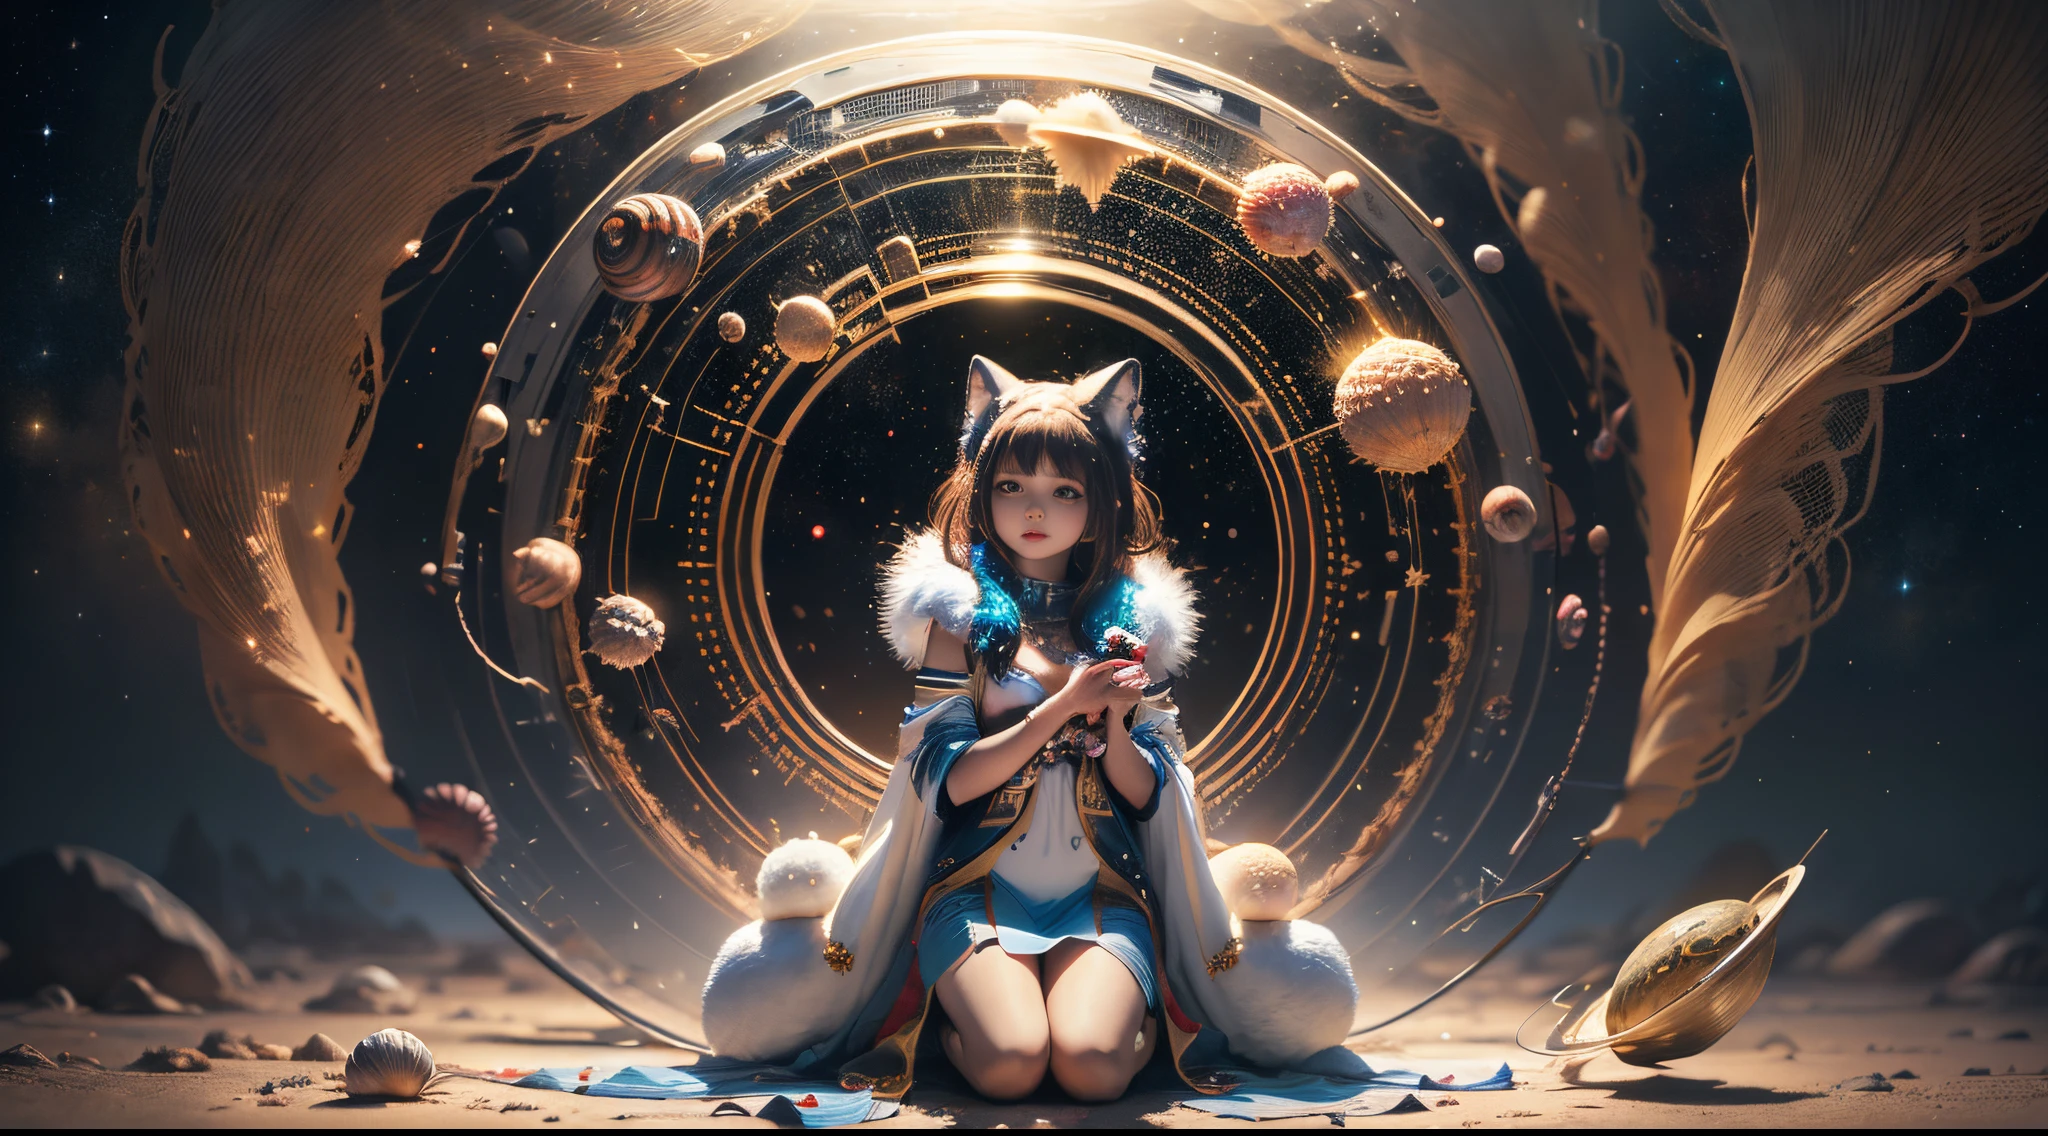 "Young Girl from the stars, (shimmering fur), celestial antennae, shell of wonder, planetary dreamscape, (cosmic enchantment), surreal artistry, vibrant and alien palette",kneeling, wide shot, f/1.8, bokeh